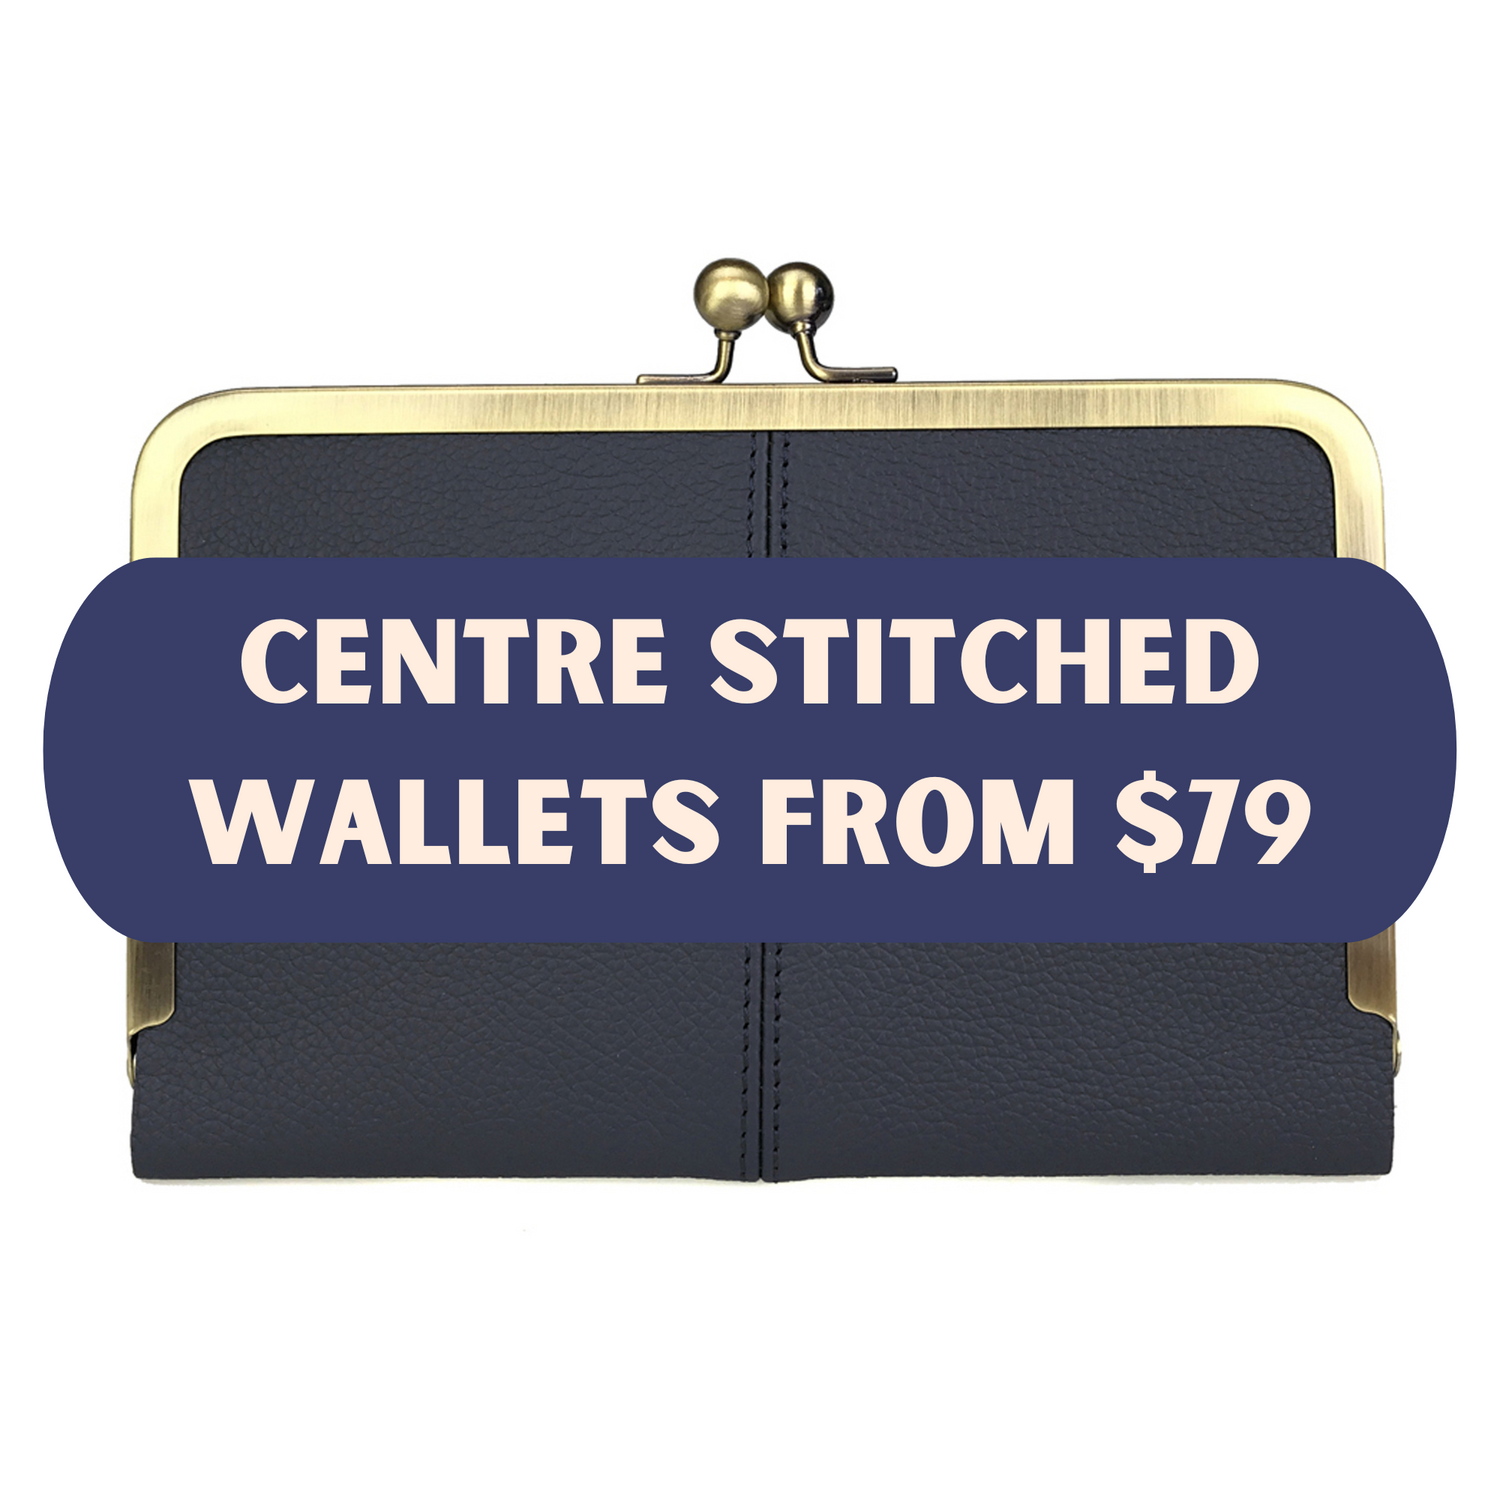 CENTRE STITCHED WALLETS